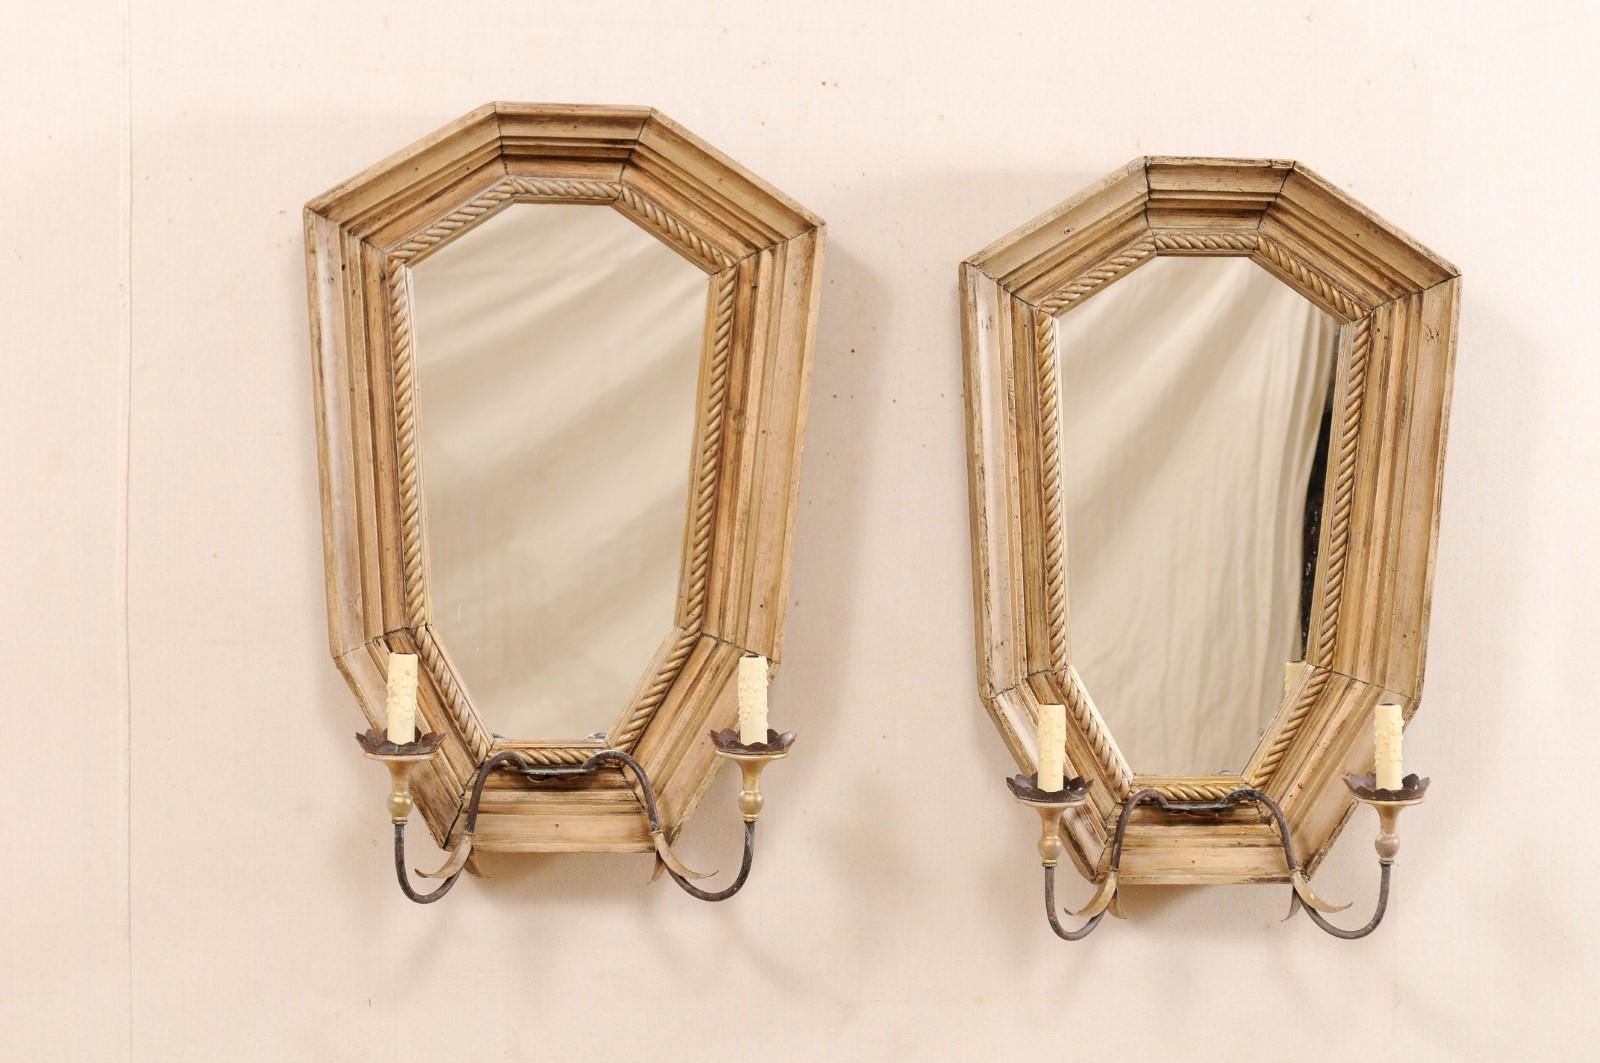 A nicely-sized Italian pair of two-light sconces with mirrored back-plate from the mid-20th century. This pair of vintage scones from Italy each feature a large shied-shaped back-plate consisting of a wood frame with roped carved inner surround